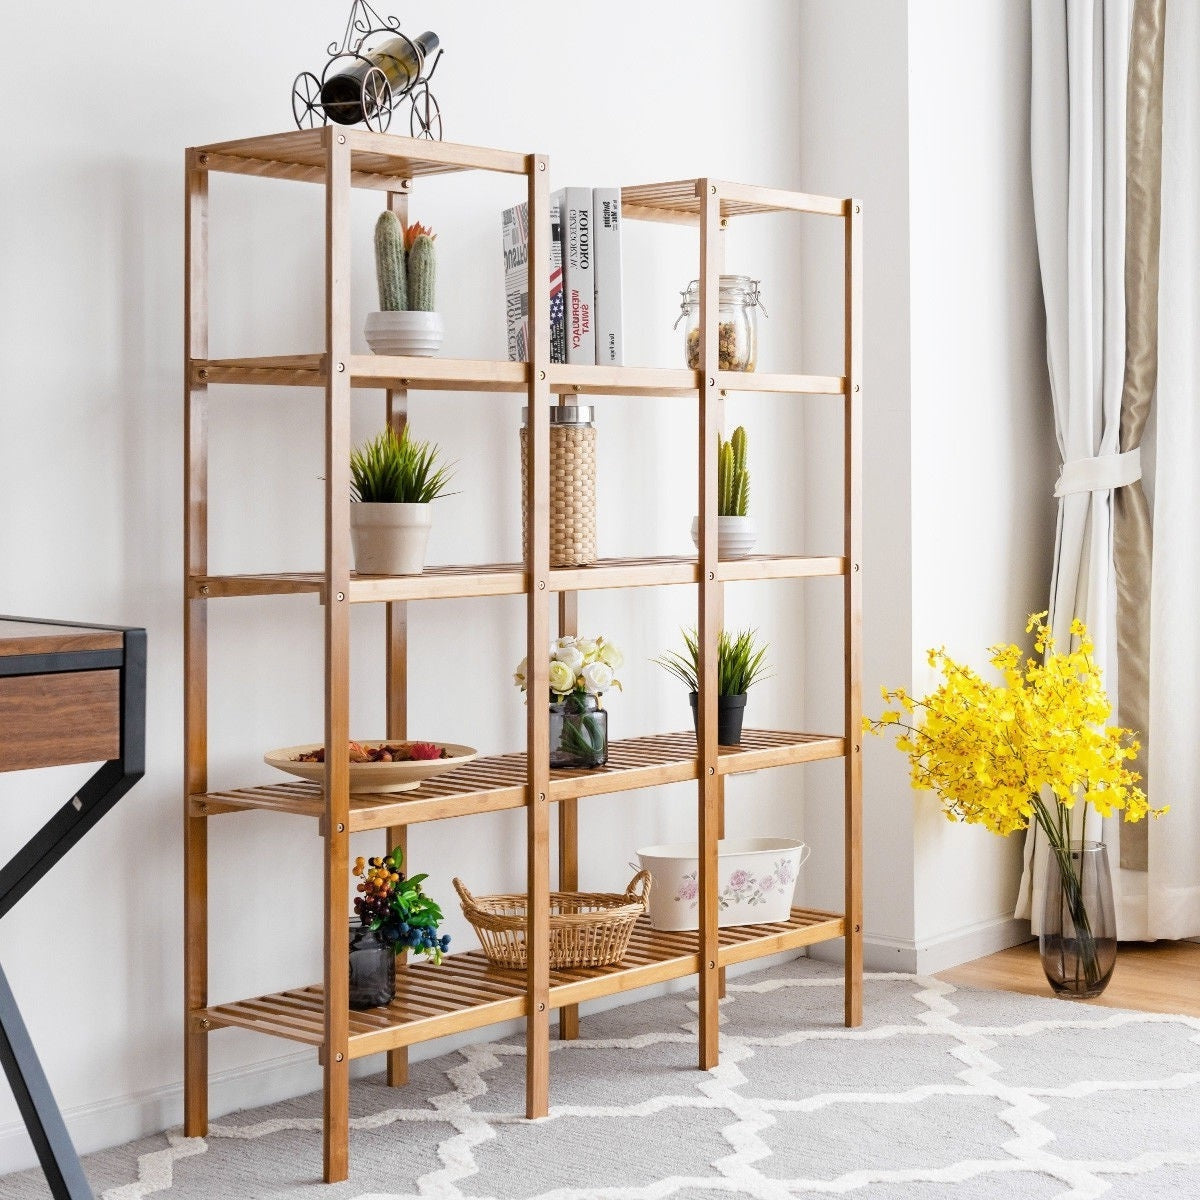 Living Room > Bookcases - Bamboo Wood 4-Shelf Bookcase Plant Stand Shelving Unit